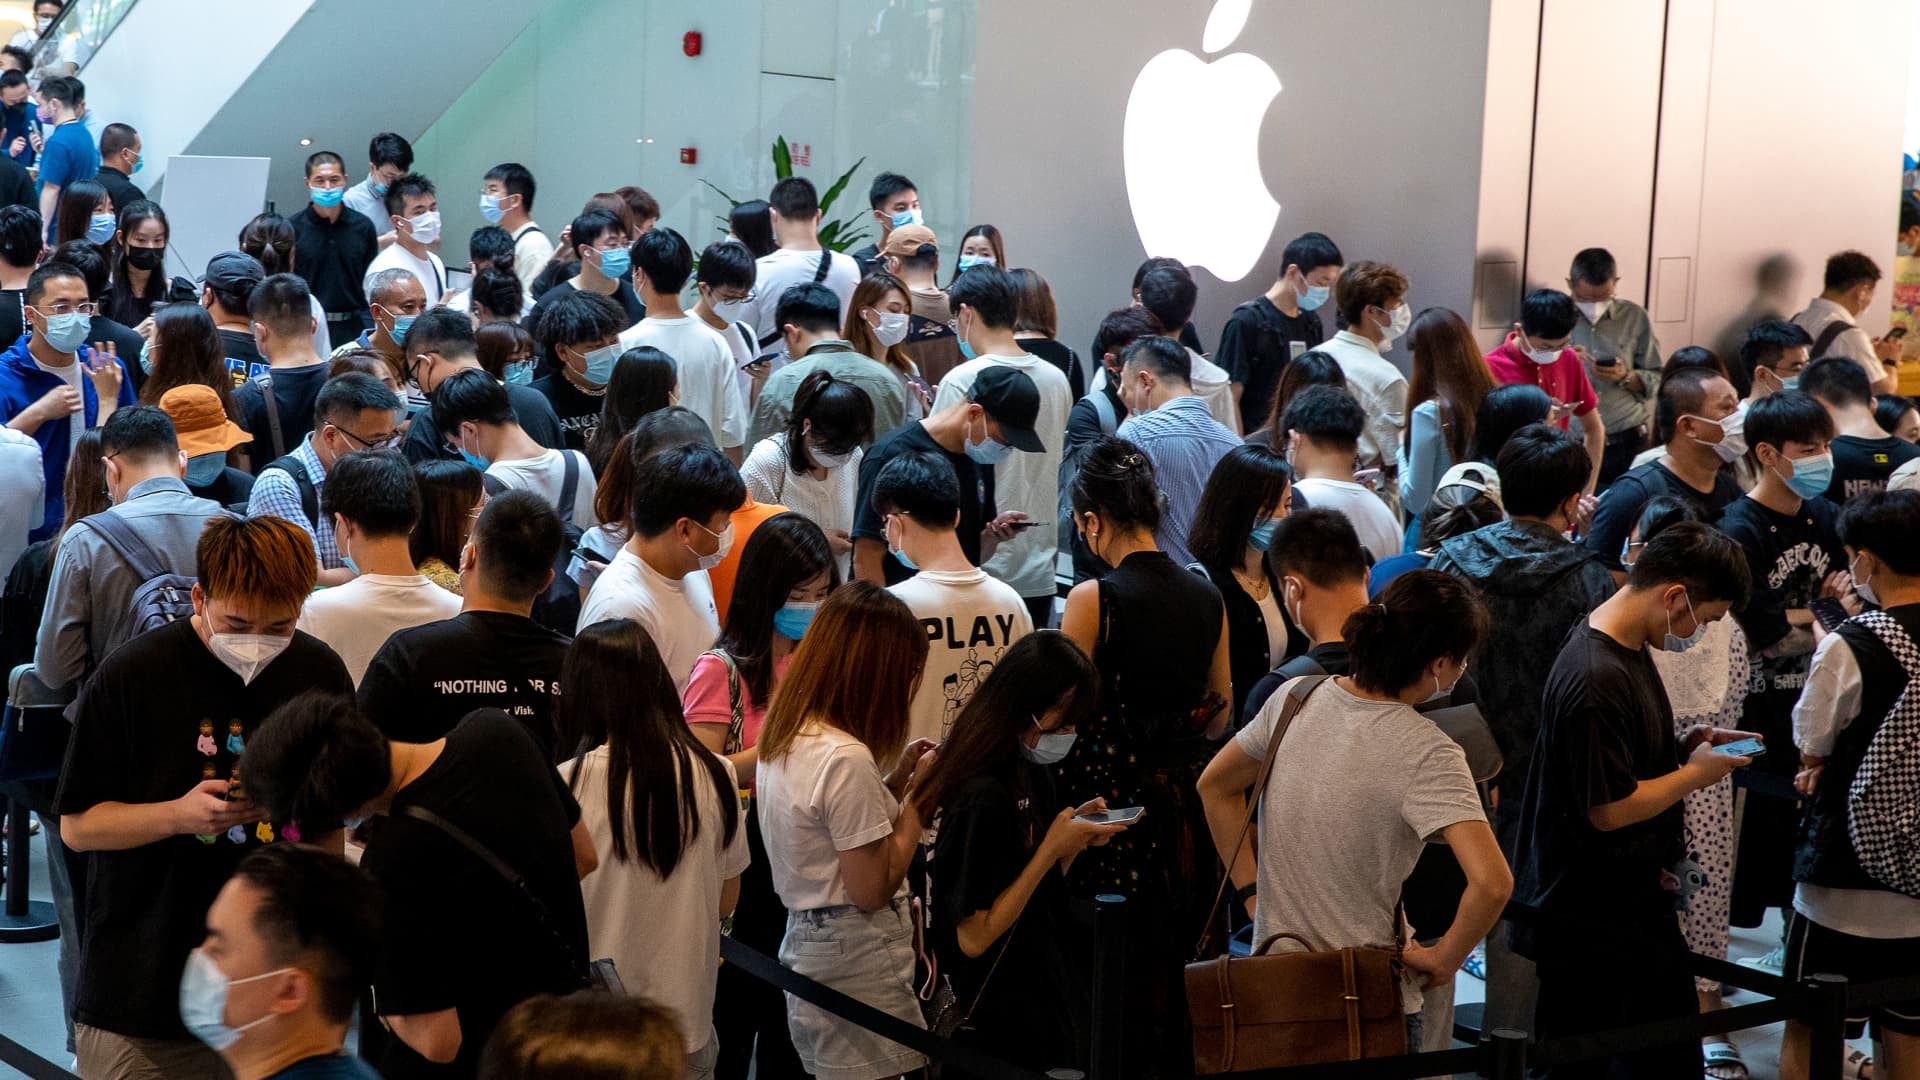 iPhone 15 sales look like they're starting off slow in China ahead of a critical holiday season